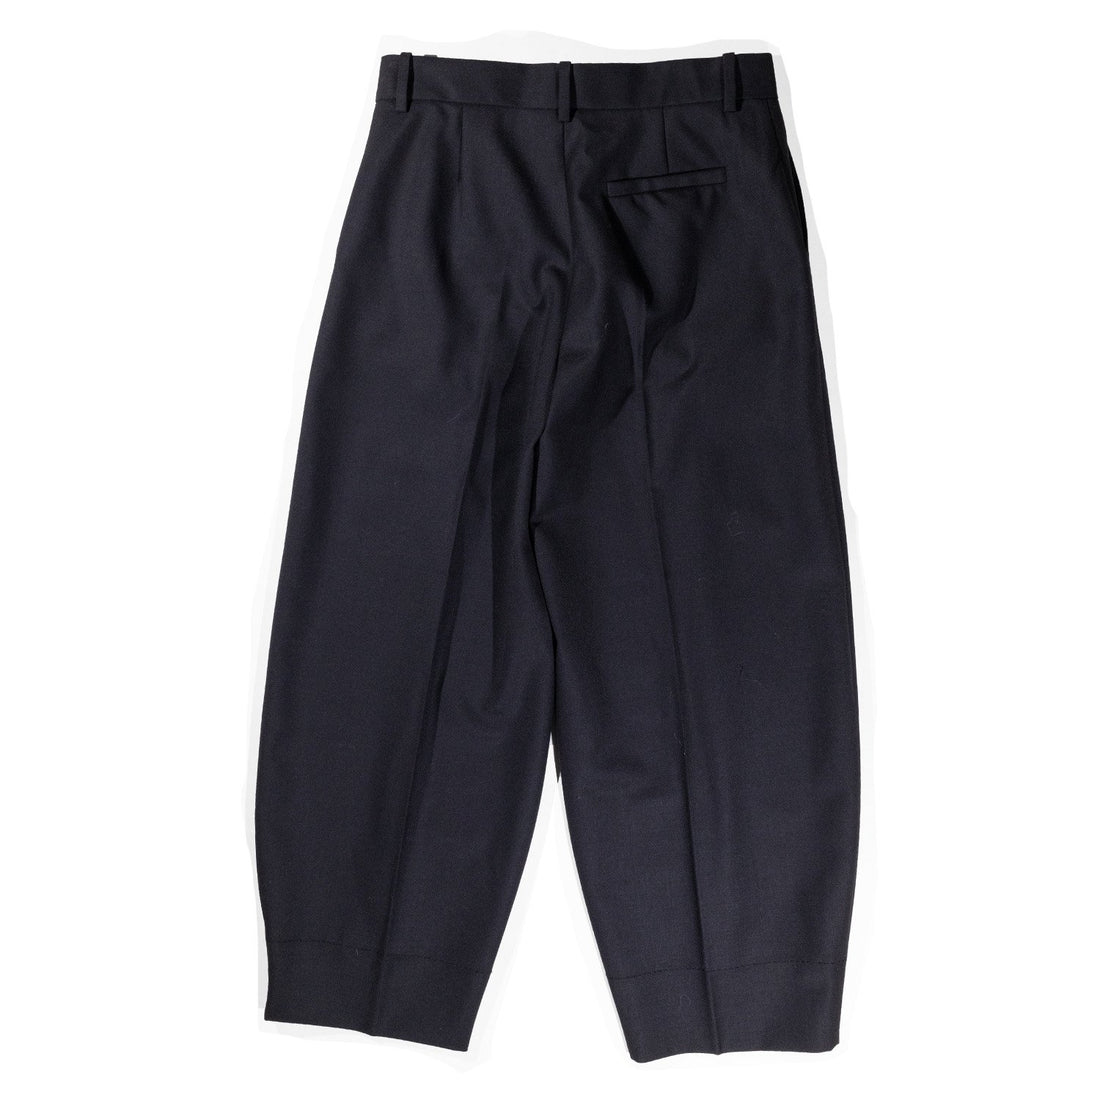 Rodebjer Aia Pant in Black